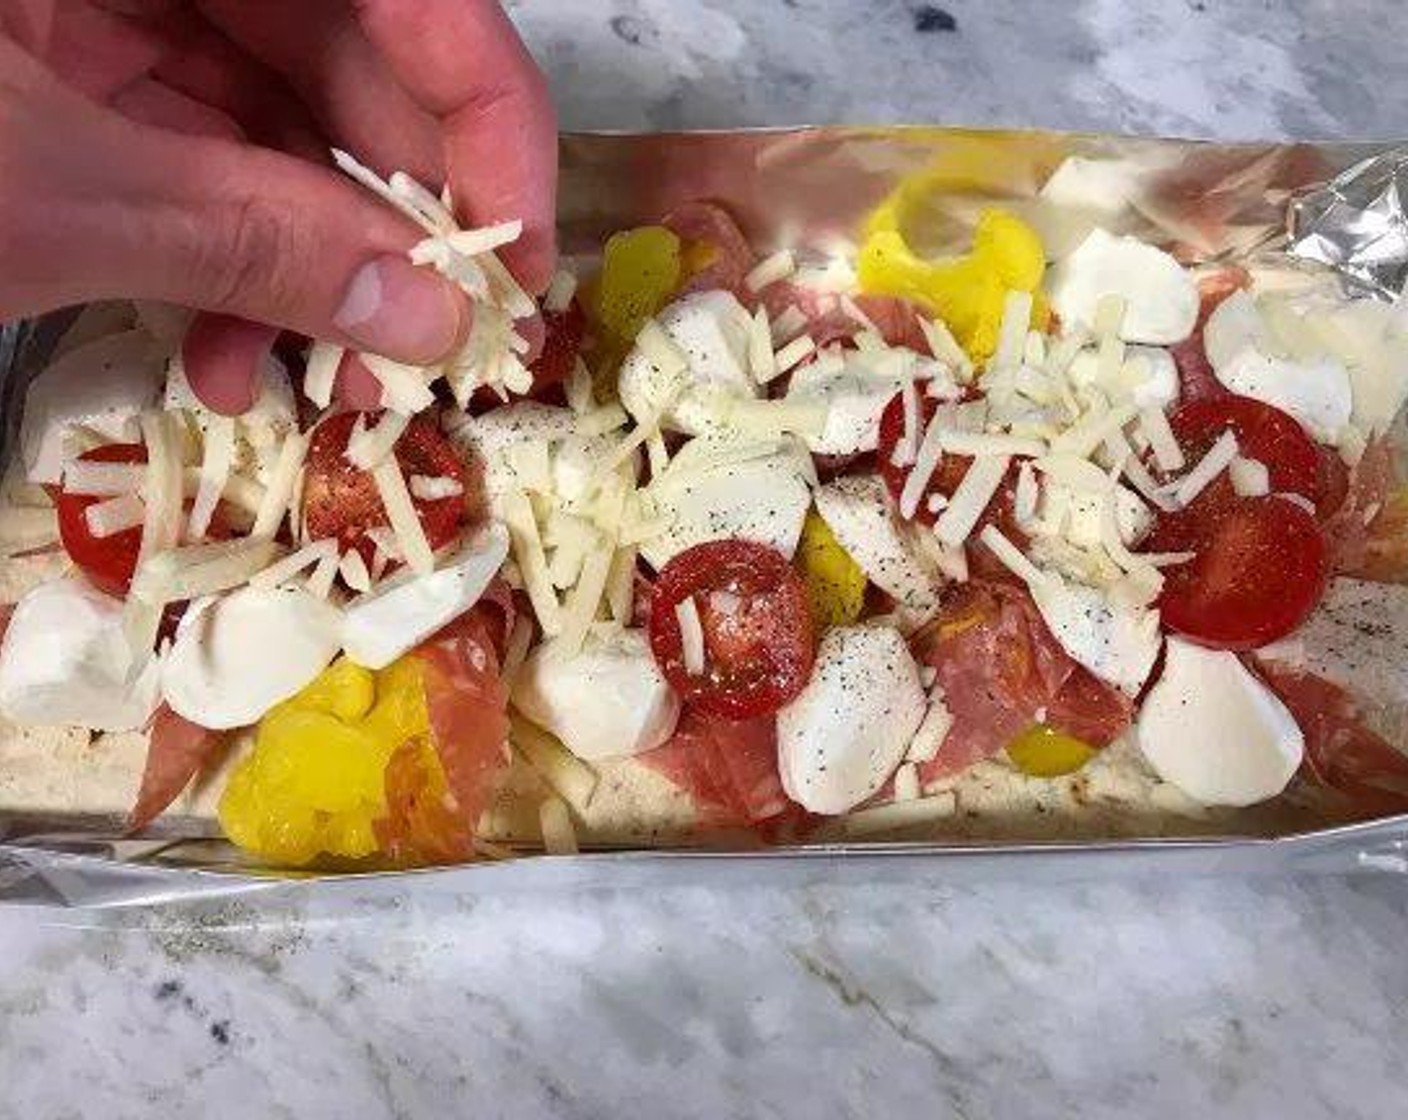 step 5 Start off by spreading out the pickled vegetables on the flatbread. Next, layer with the deli meats and fresh mozzarella slices. Then, top with cherry tomatoes and lightly Ground Black Pepper (to taste) the tomatoes. Finish toppings by sprinkling the Parmesan Cheese (1/4 cup) on top.